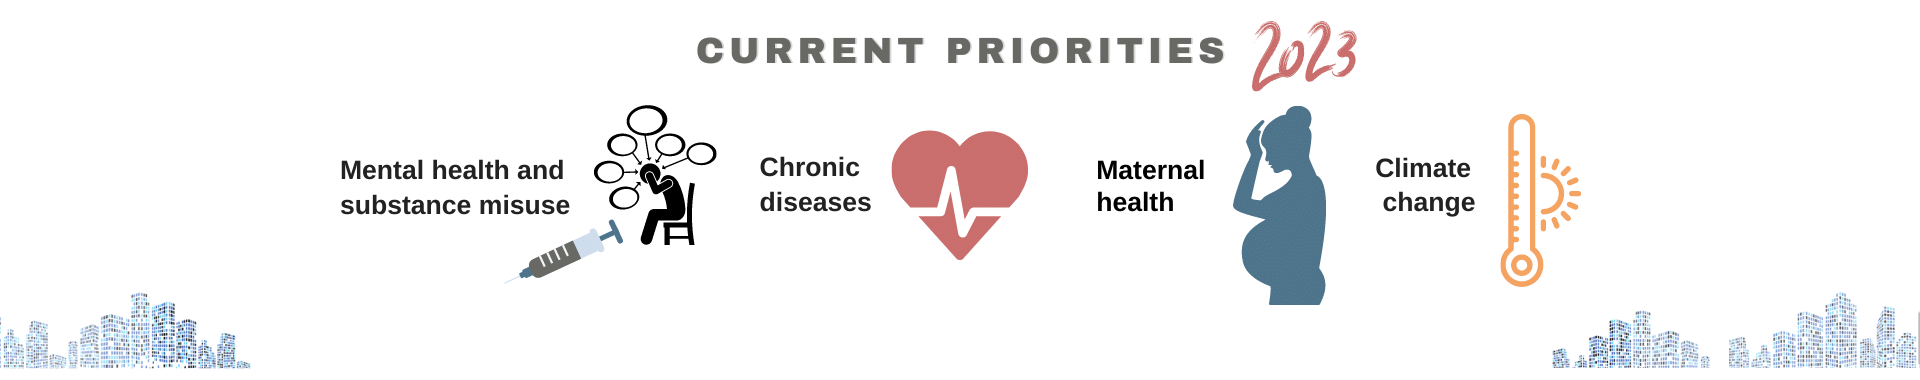 Graphic - Current Priorities 2023. Mental Health and substance misuse. Chronic diseases. Maternal Health. Climate Change.